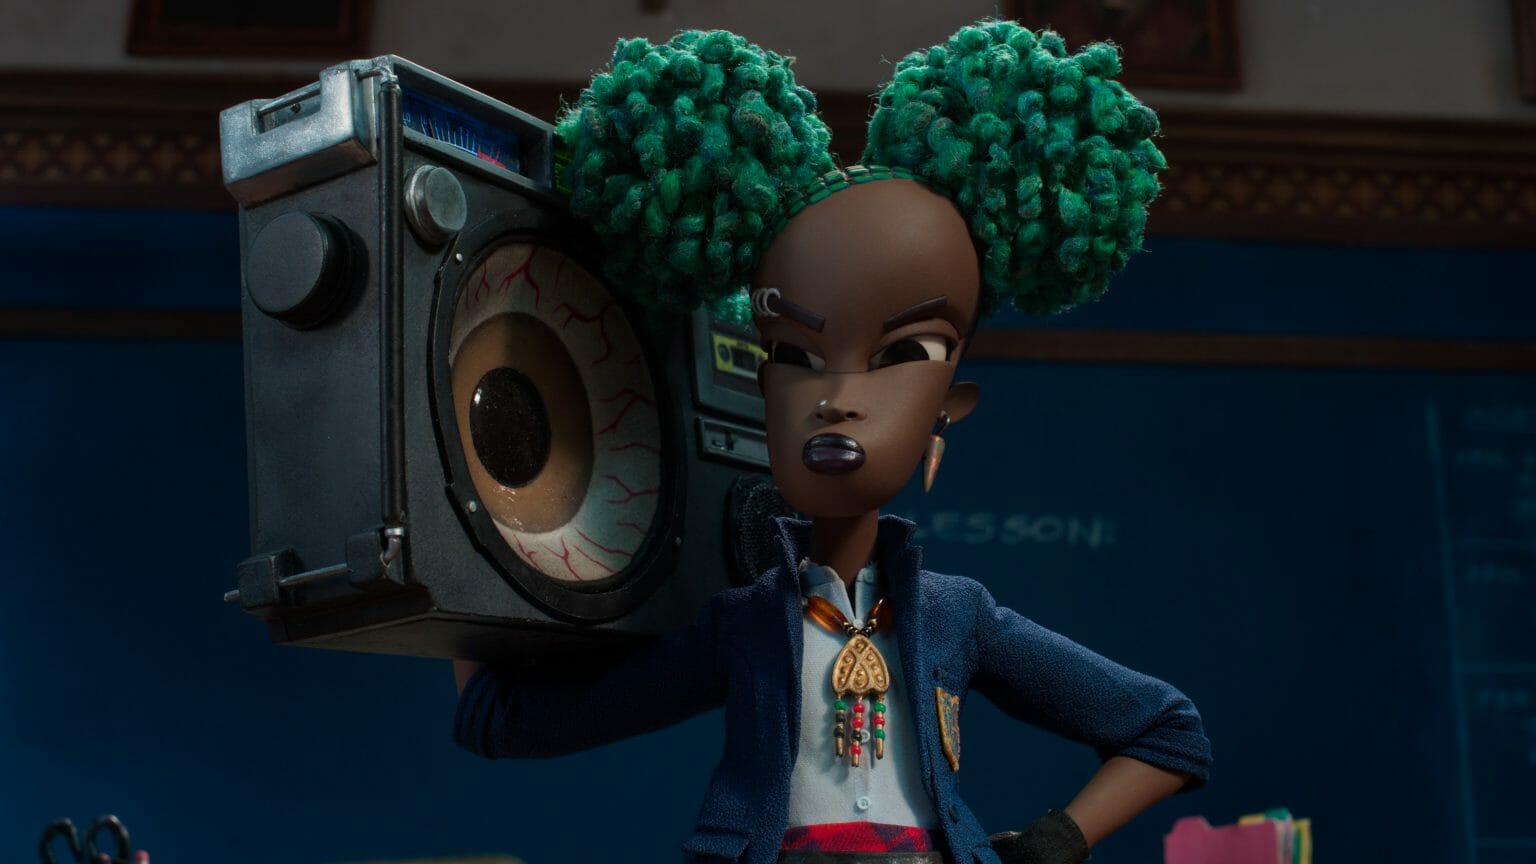 Kat the young Black goth girl holds a boom box painted to look like a huge eye ball in front of her classroom in the Netflix stop motion animation film WENDELL & WILD.